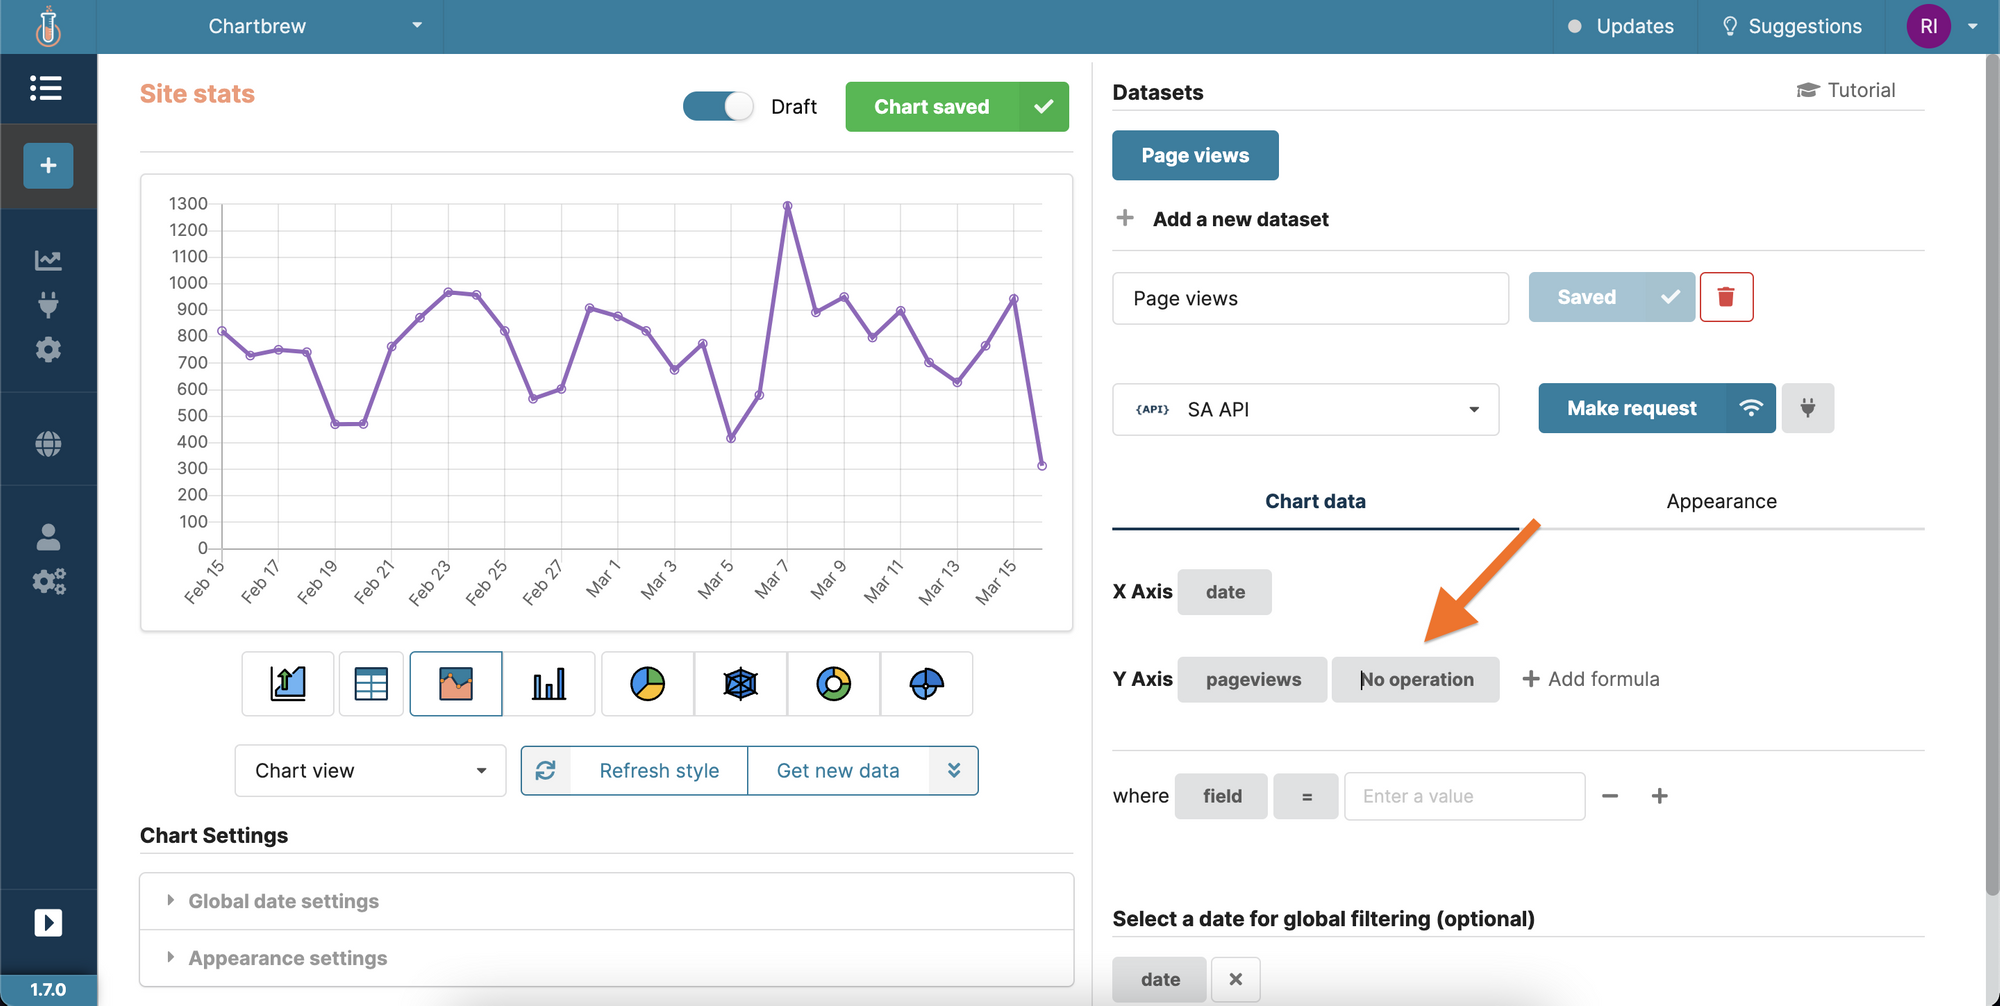 Simple Analytics page views in Chartbrew